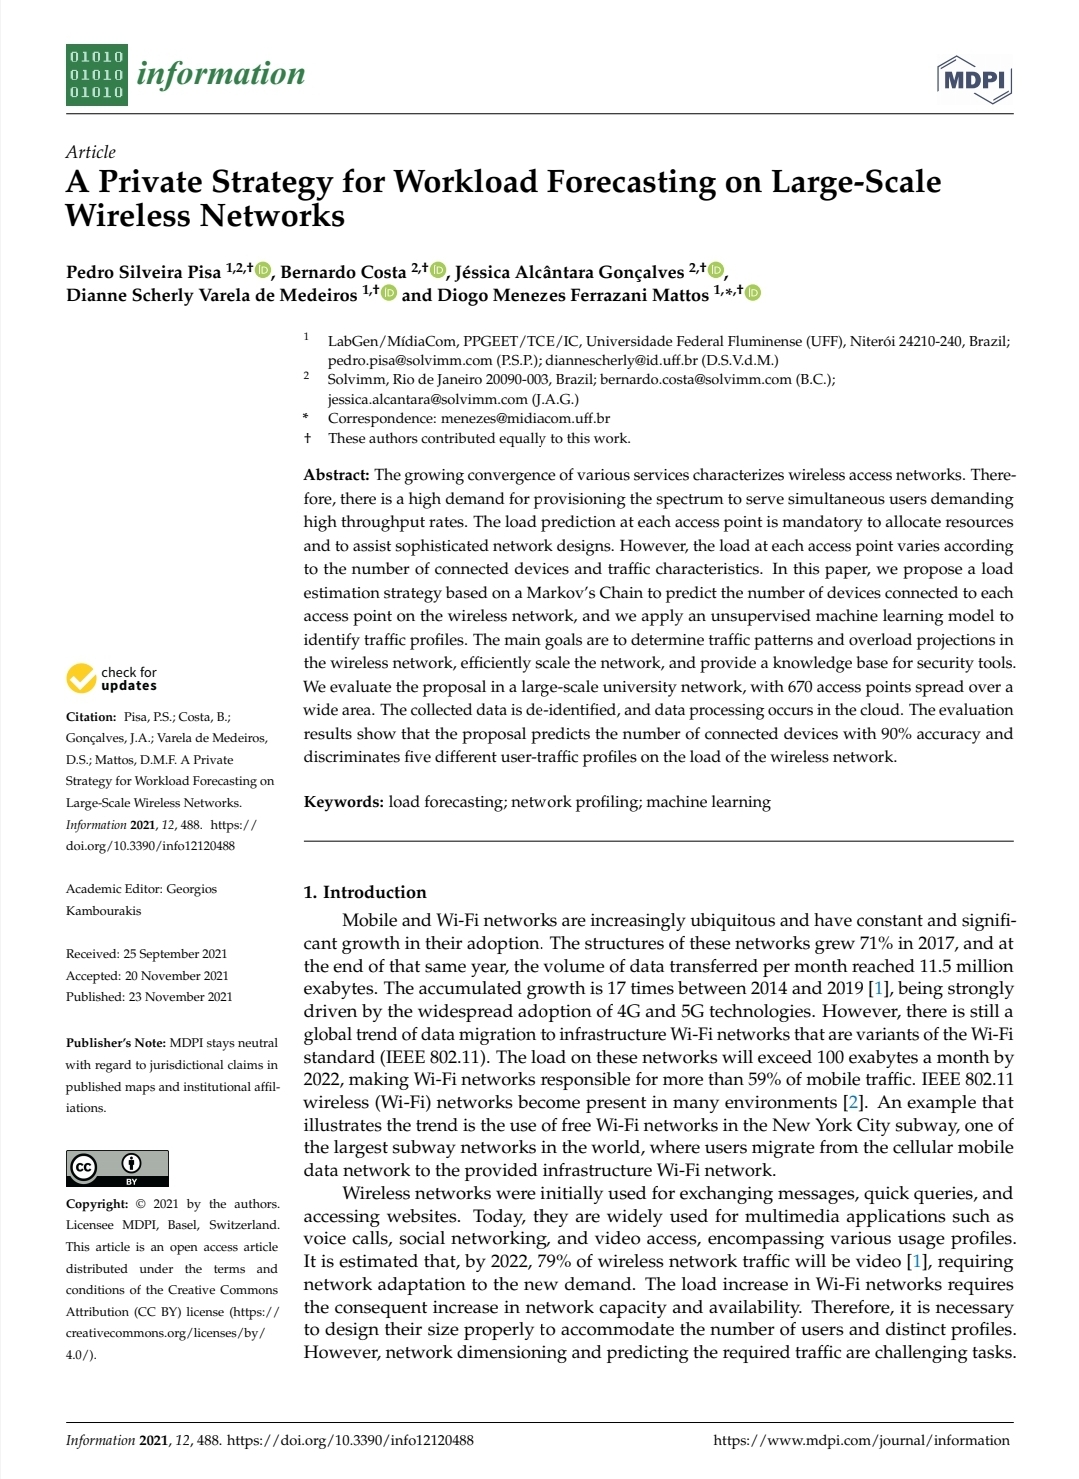 A Private Strategy for Workload Forecasting on Large-Scale Wireless Networks